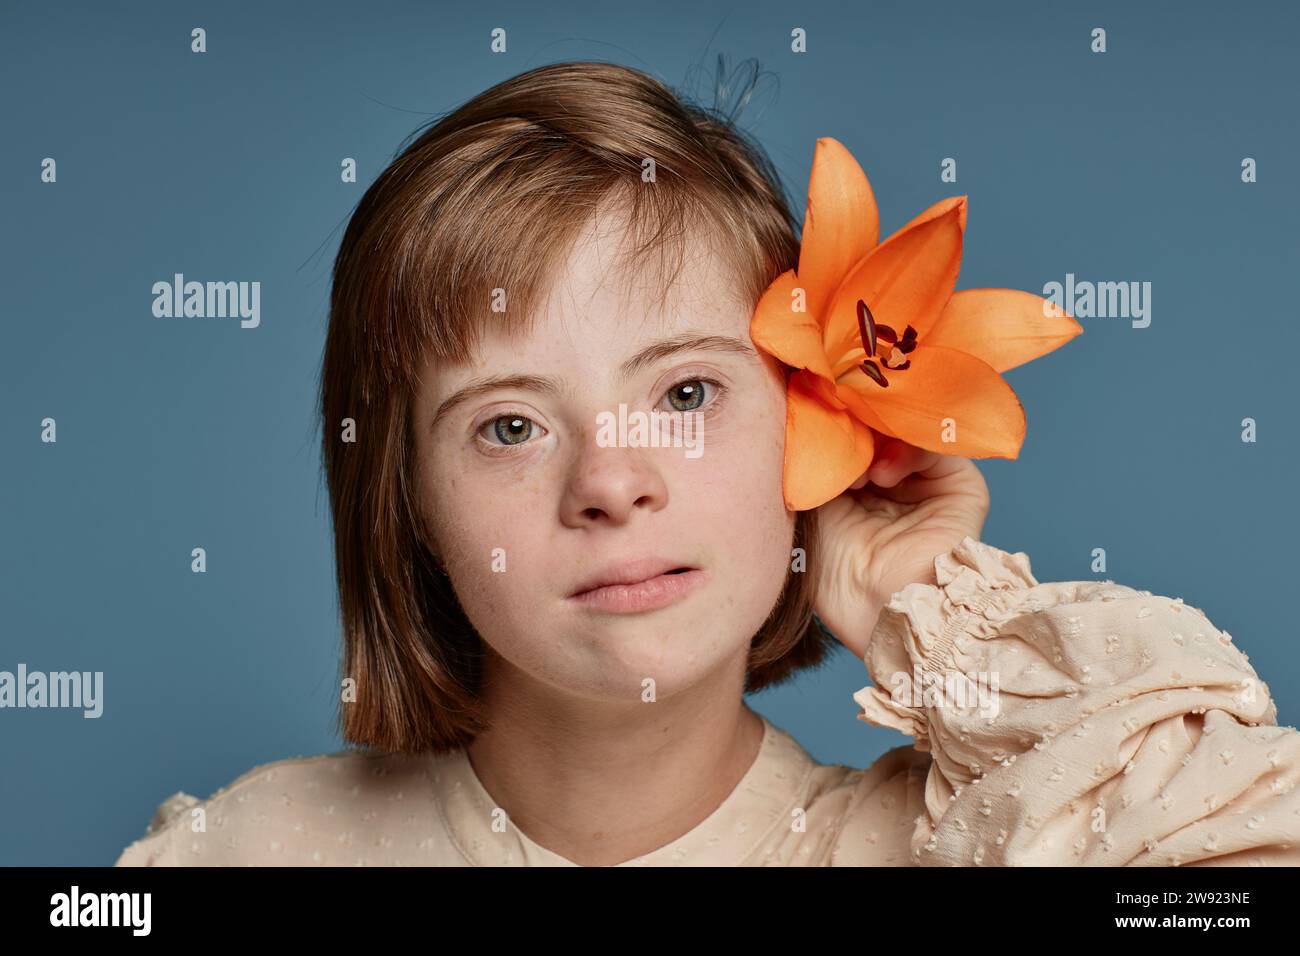 Girl with down syndrome holding orange orchid behind ear against blue background Stock Photo